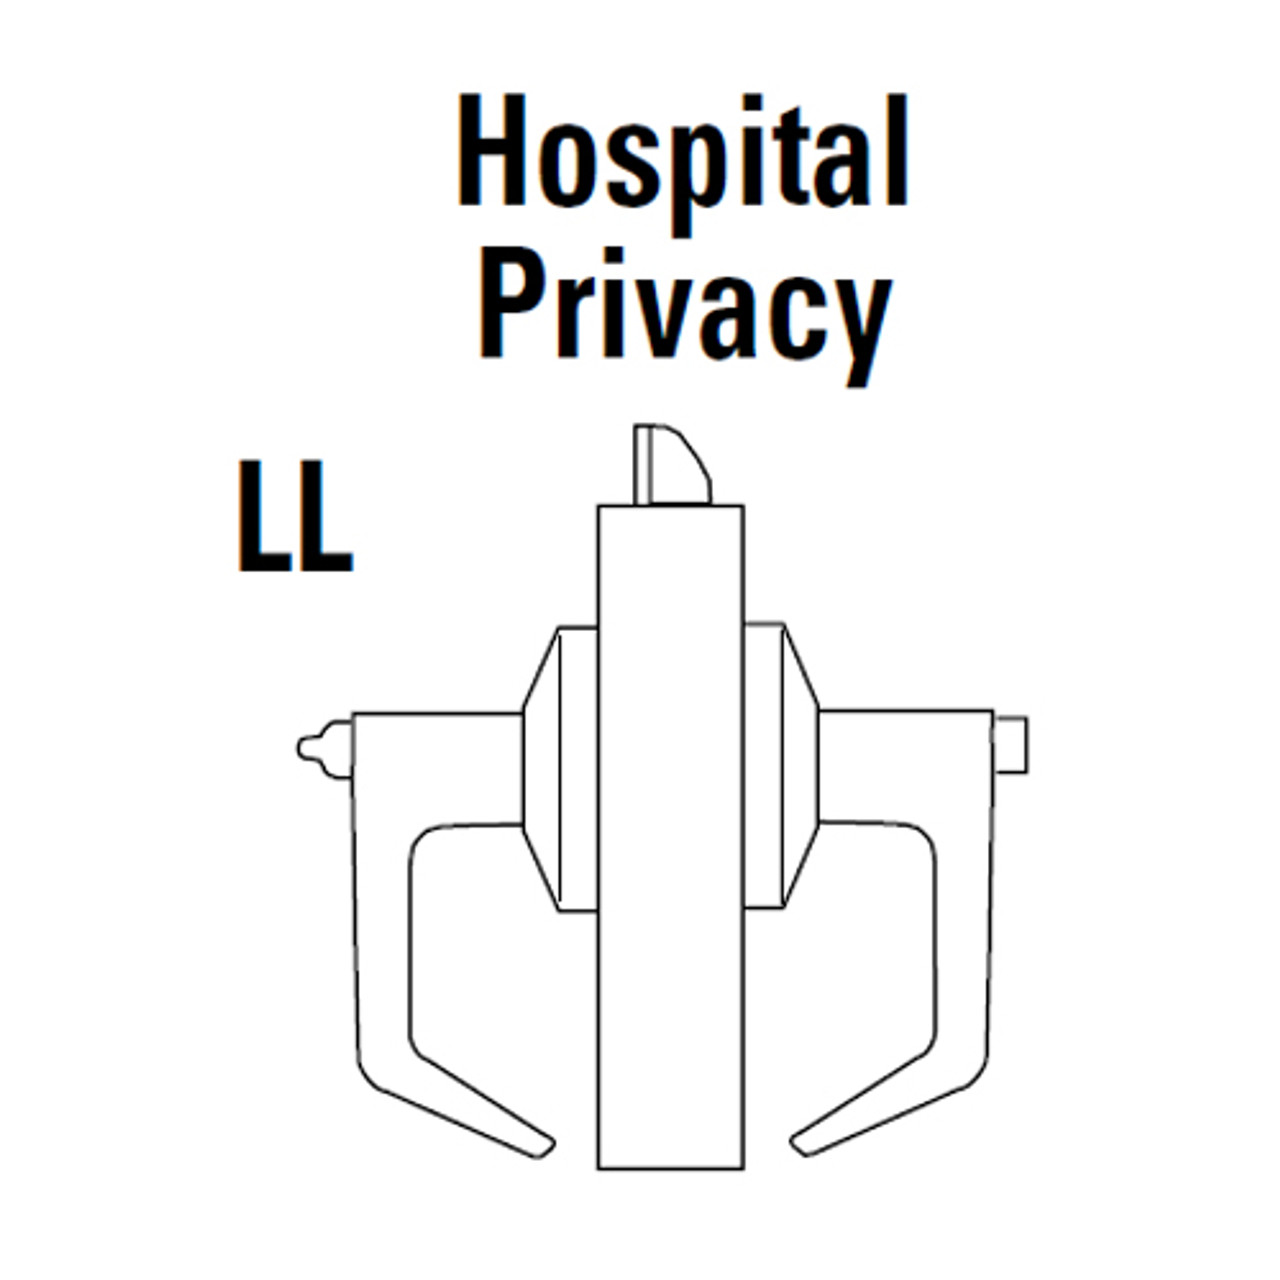 9K30LL14LS3611 Best 9K Series Hospital Privacy Heavy Duty Cylindrical Lever Locks in Bright Bronze